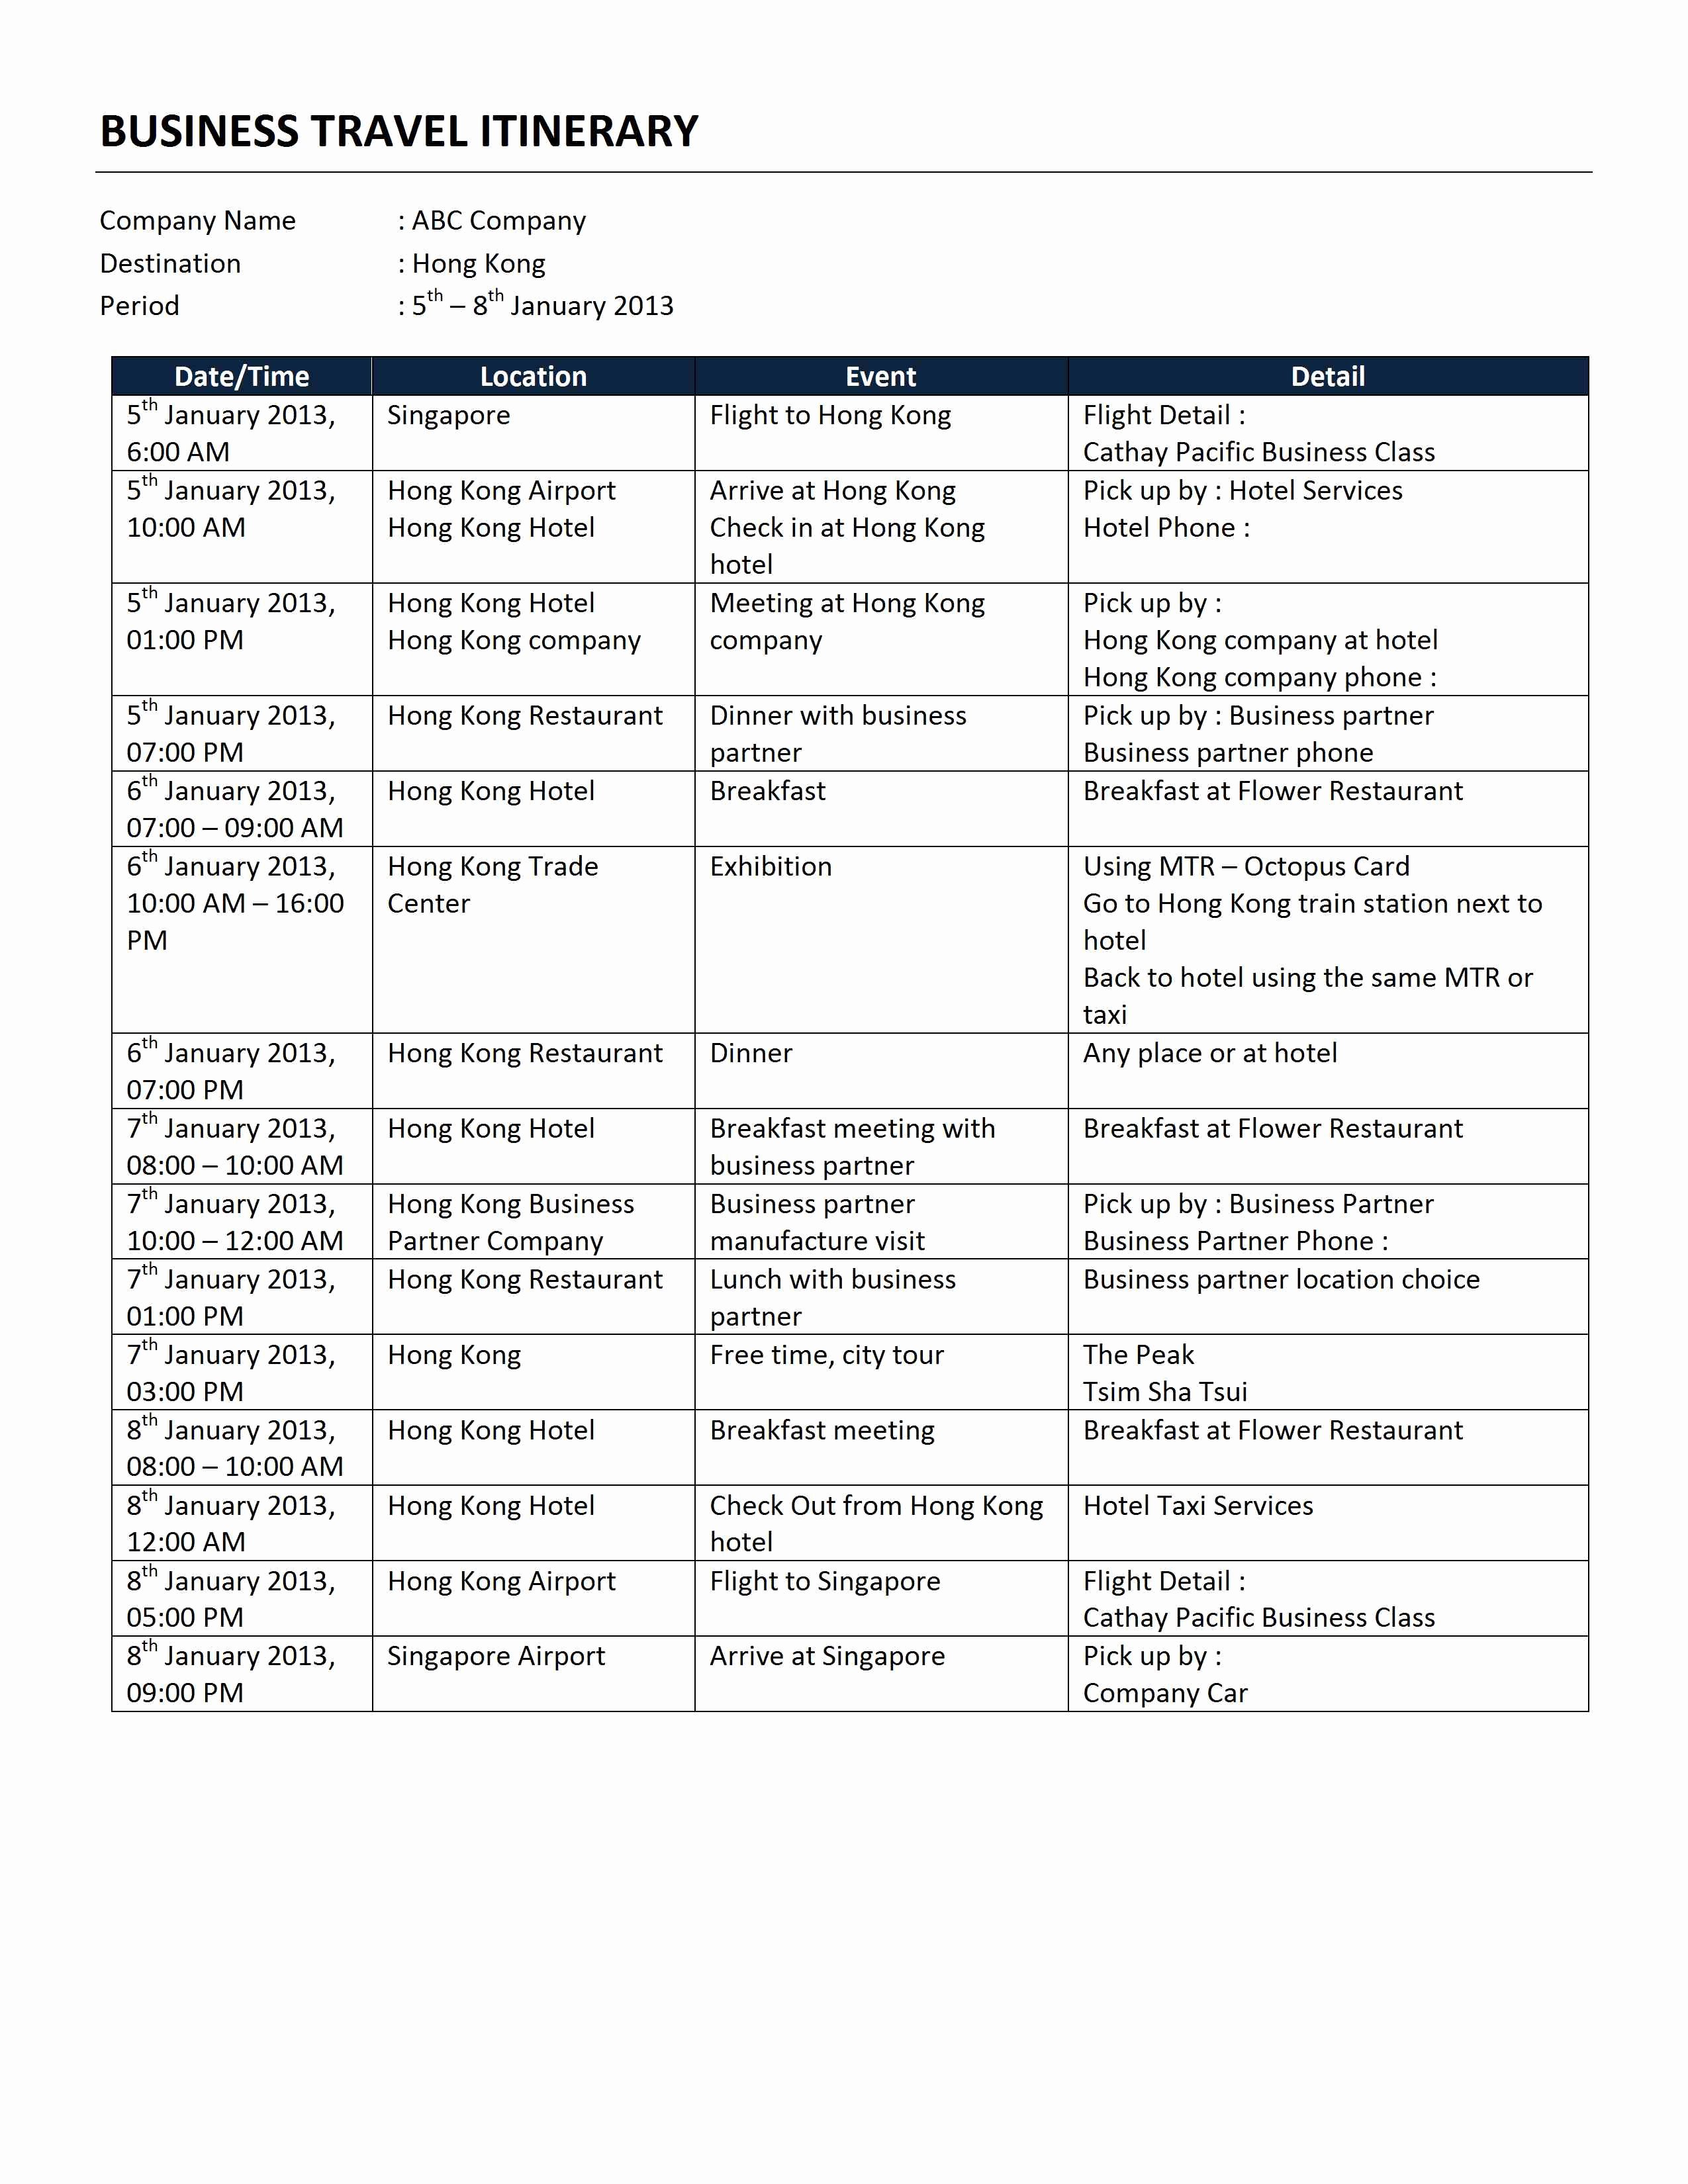 Business Travel Itinerary Template Luxury Business Travel Itinerary Template